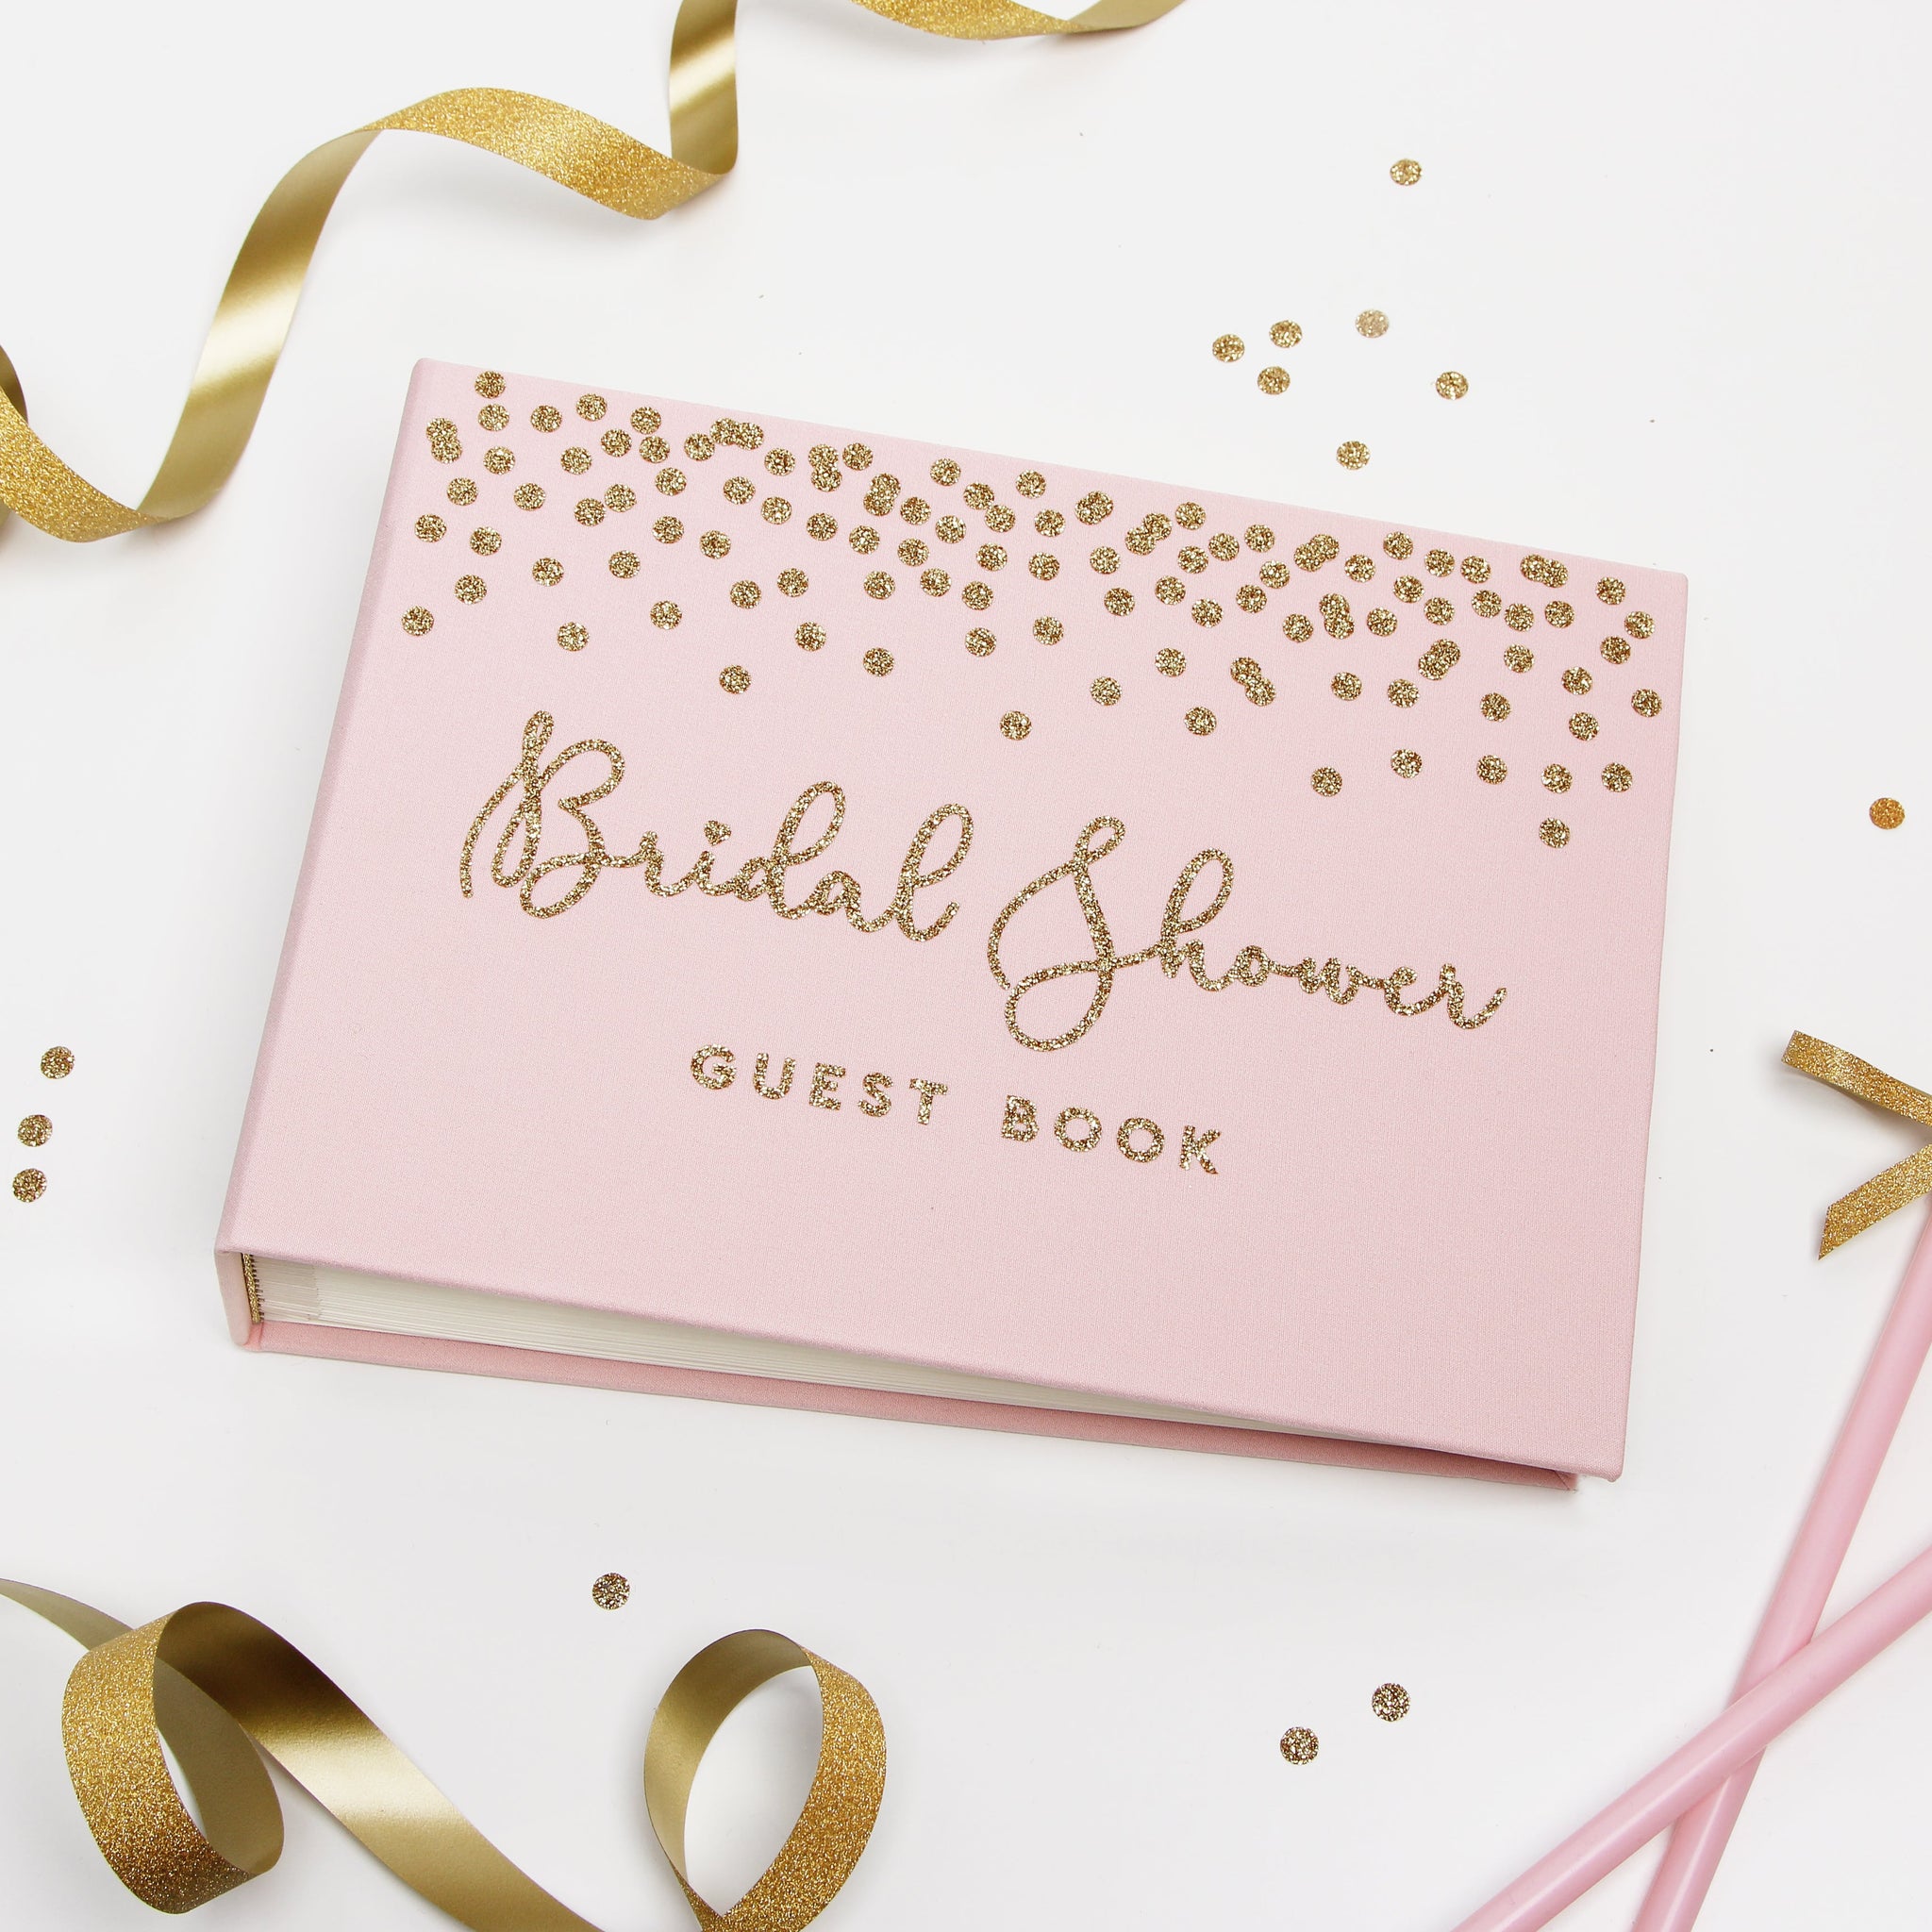 Personalized Bridal Shower Guest Book - Pink Album with Gold Glitter Foil for Hen Party - Liumy 